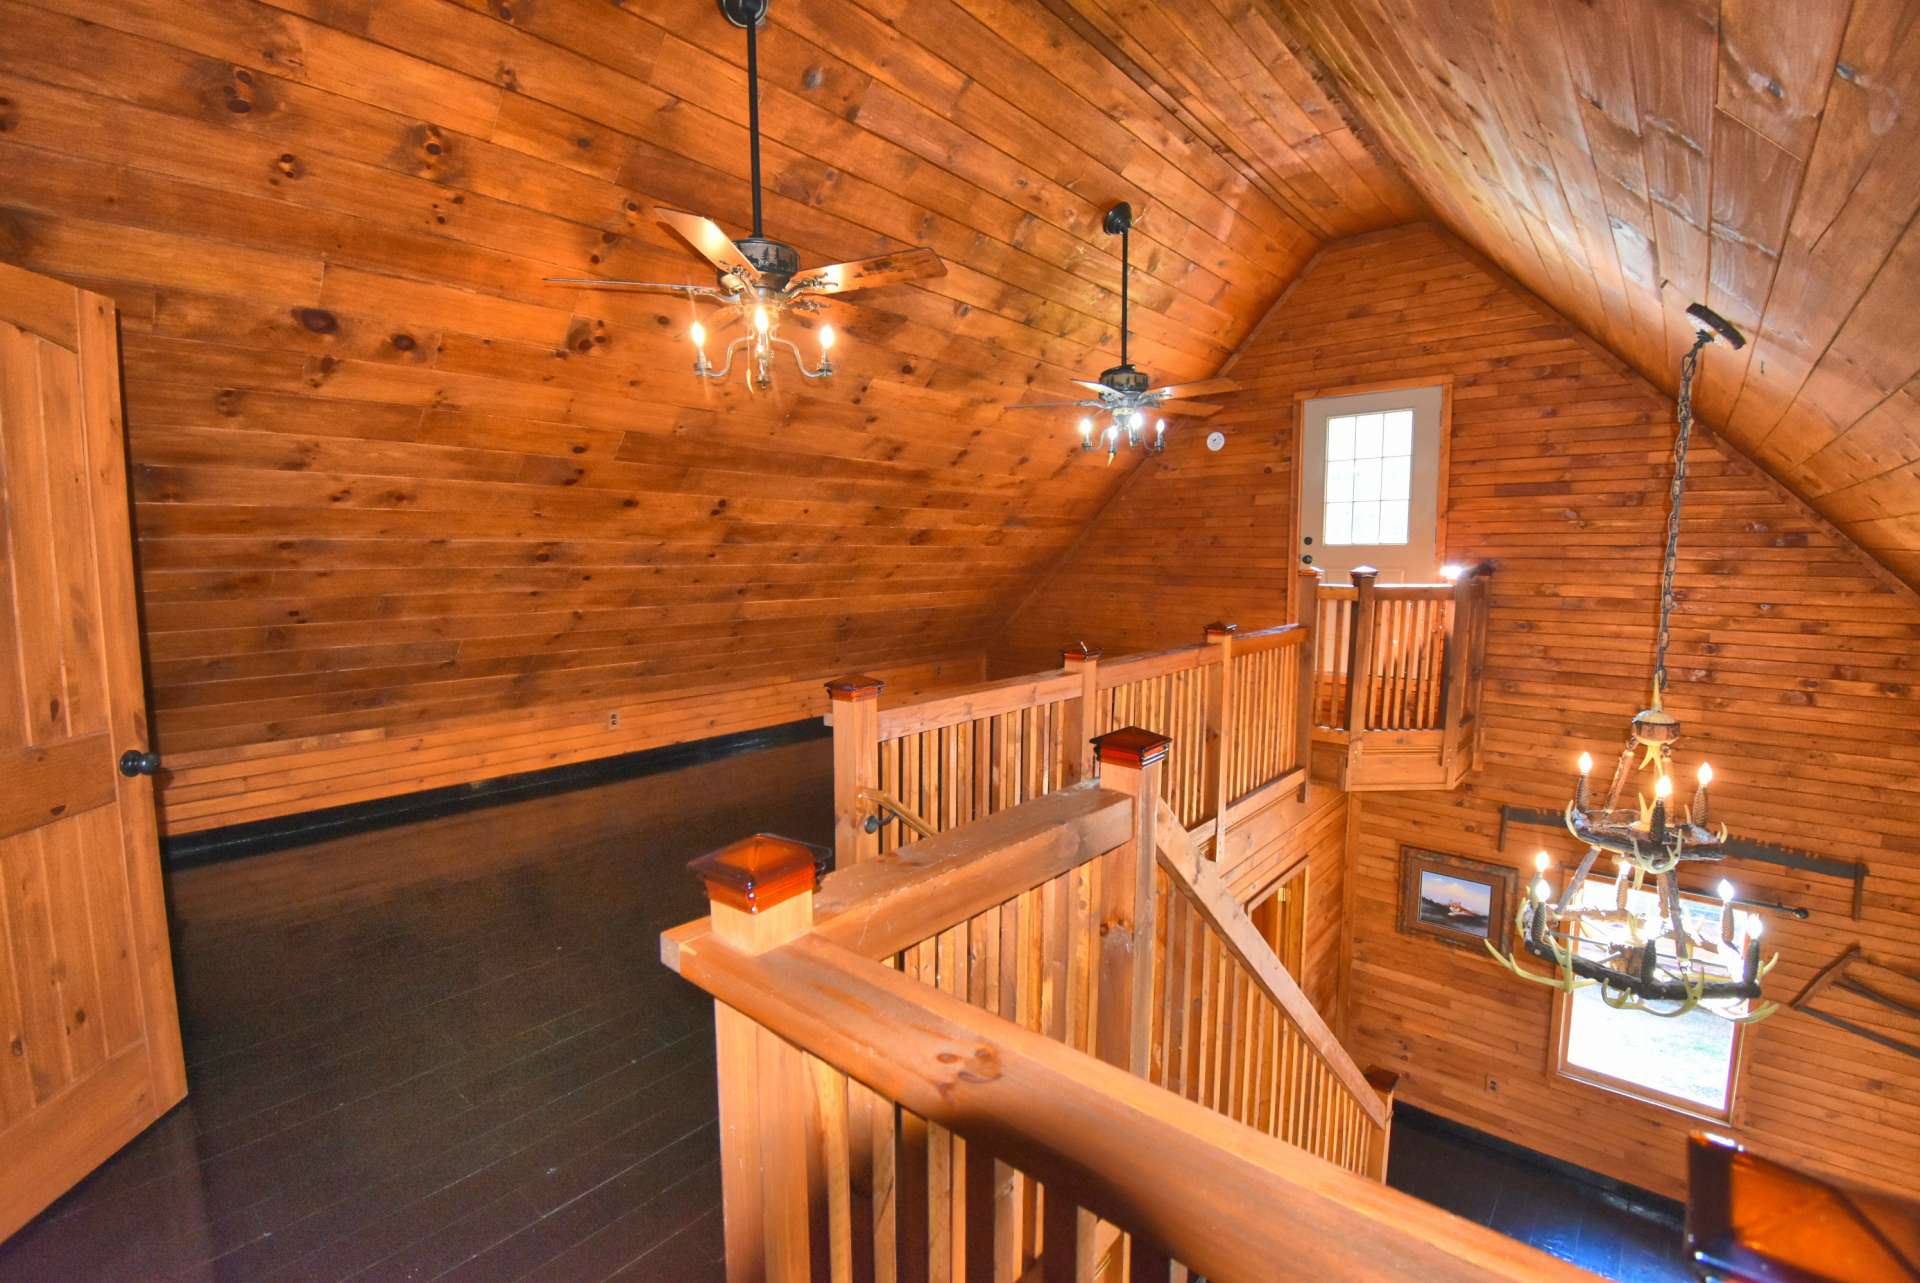 On the upper level, you will find an open loft area overlooking the great room.